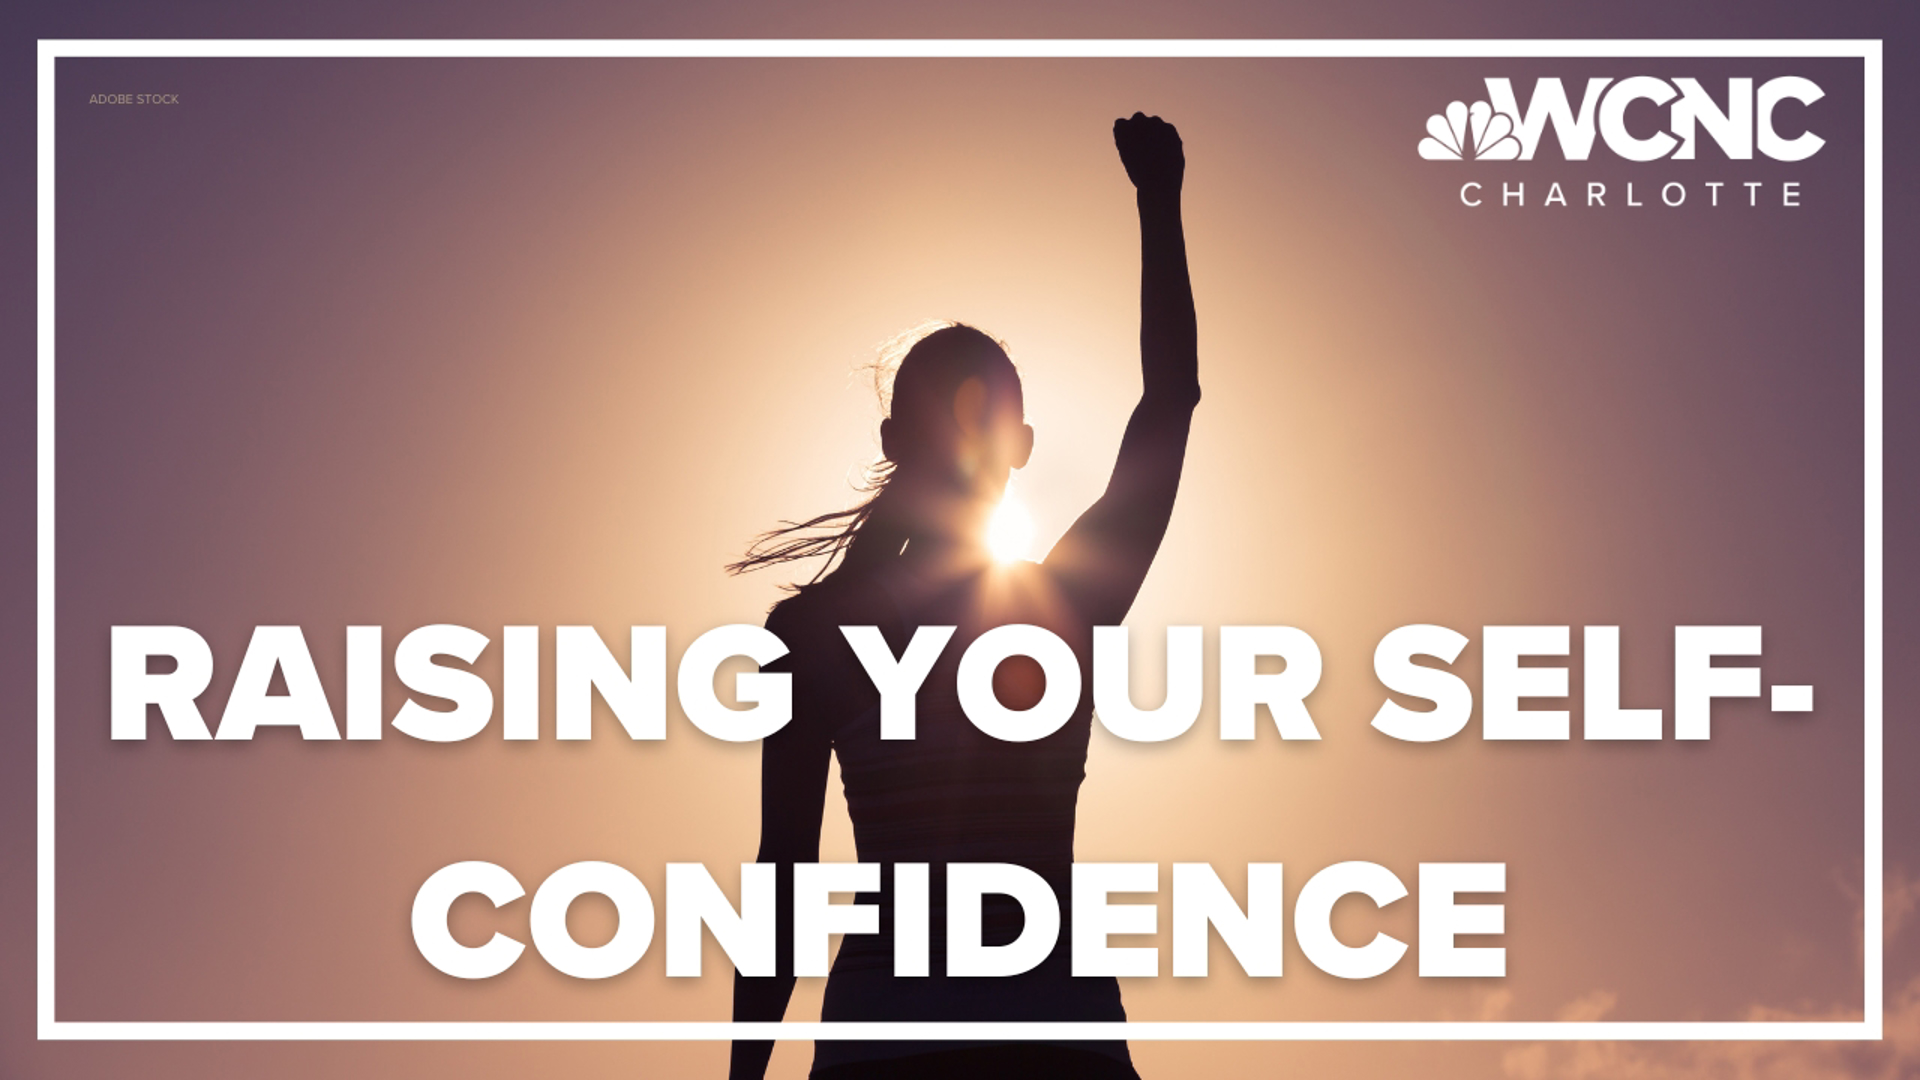 Coach LaMonte gives us tips on how to raise your self-confidence.